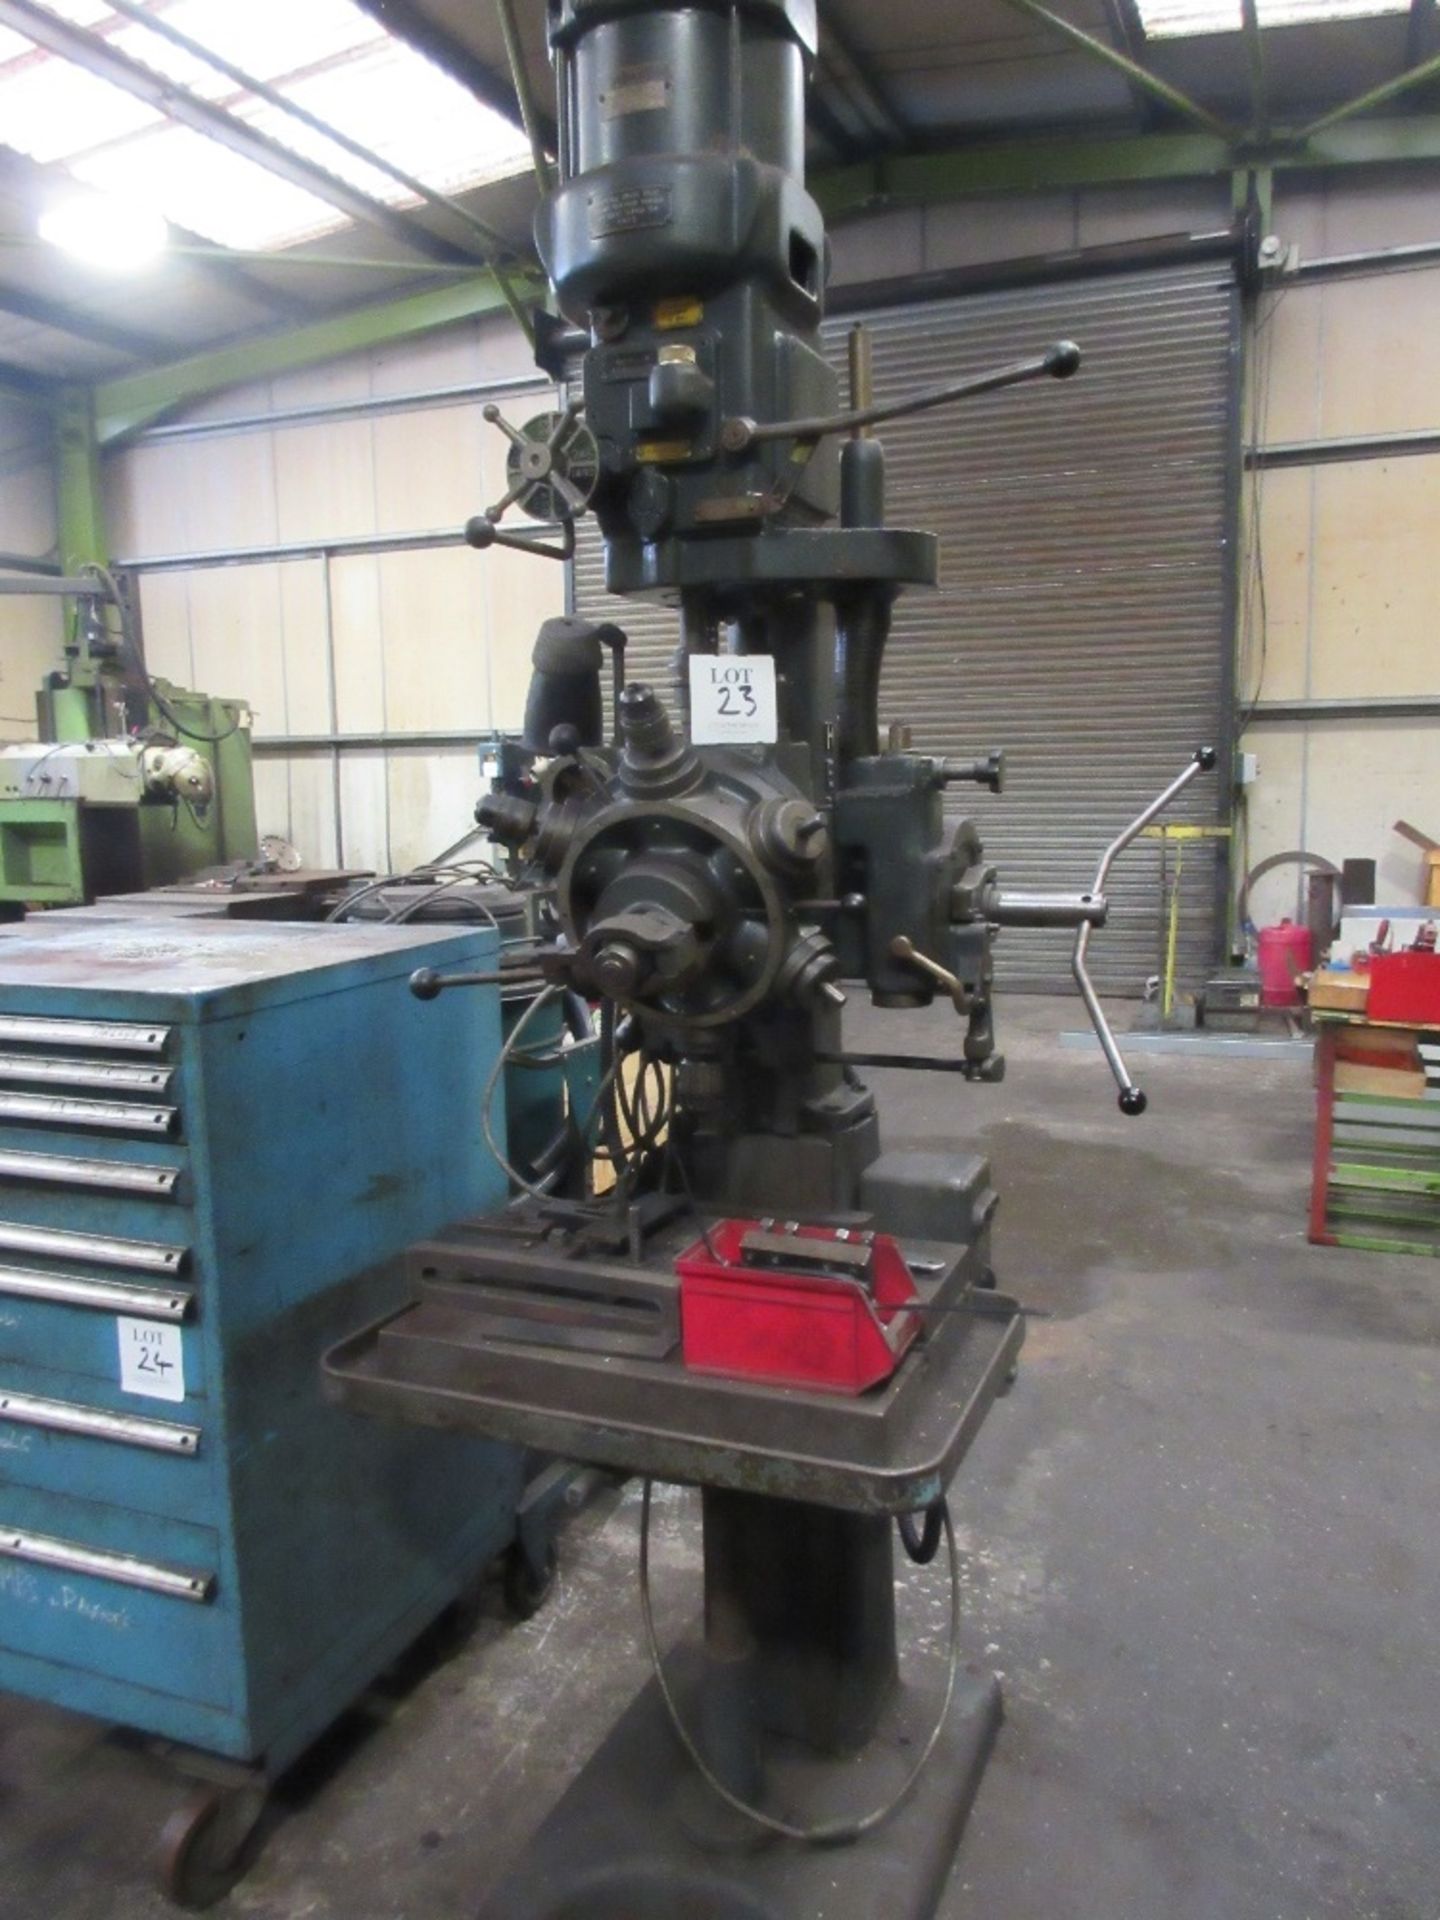 Herbert 6 head pillar drill. A Risk Assessment and Method Statement is required prior to the removal